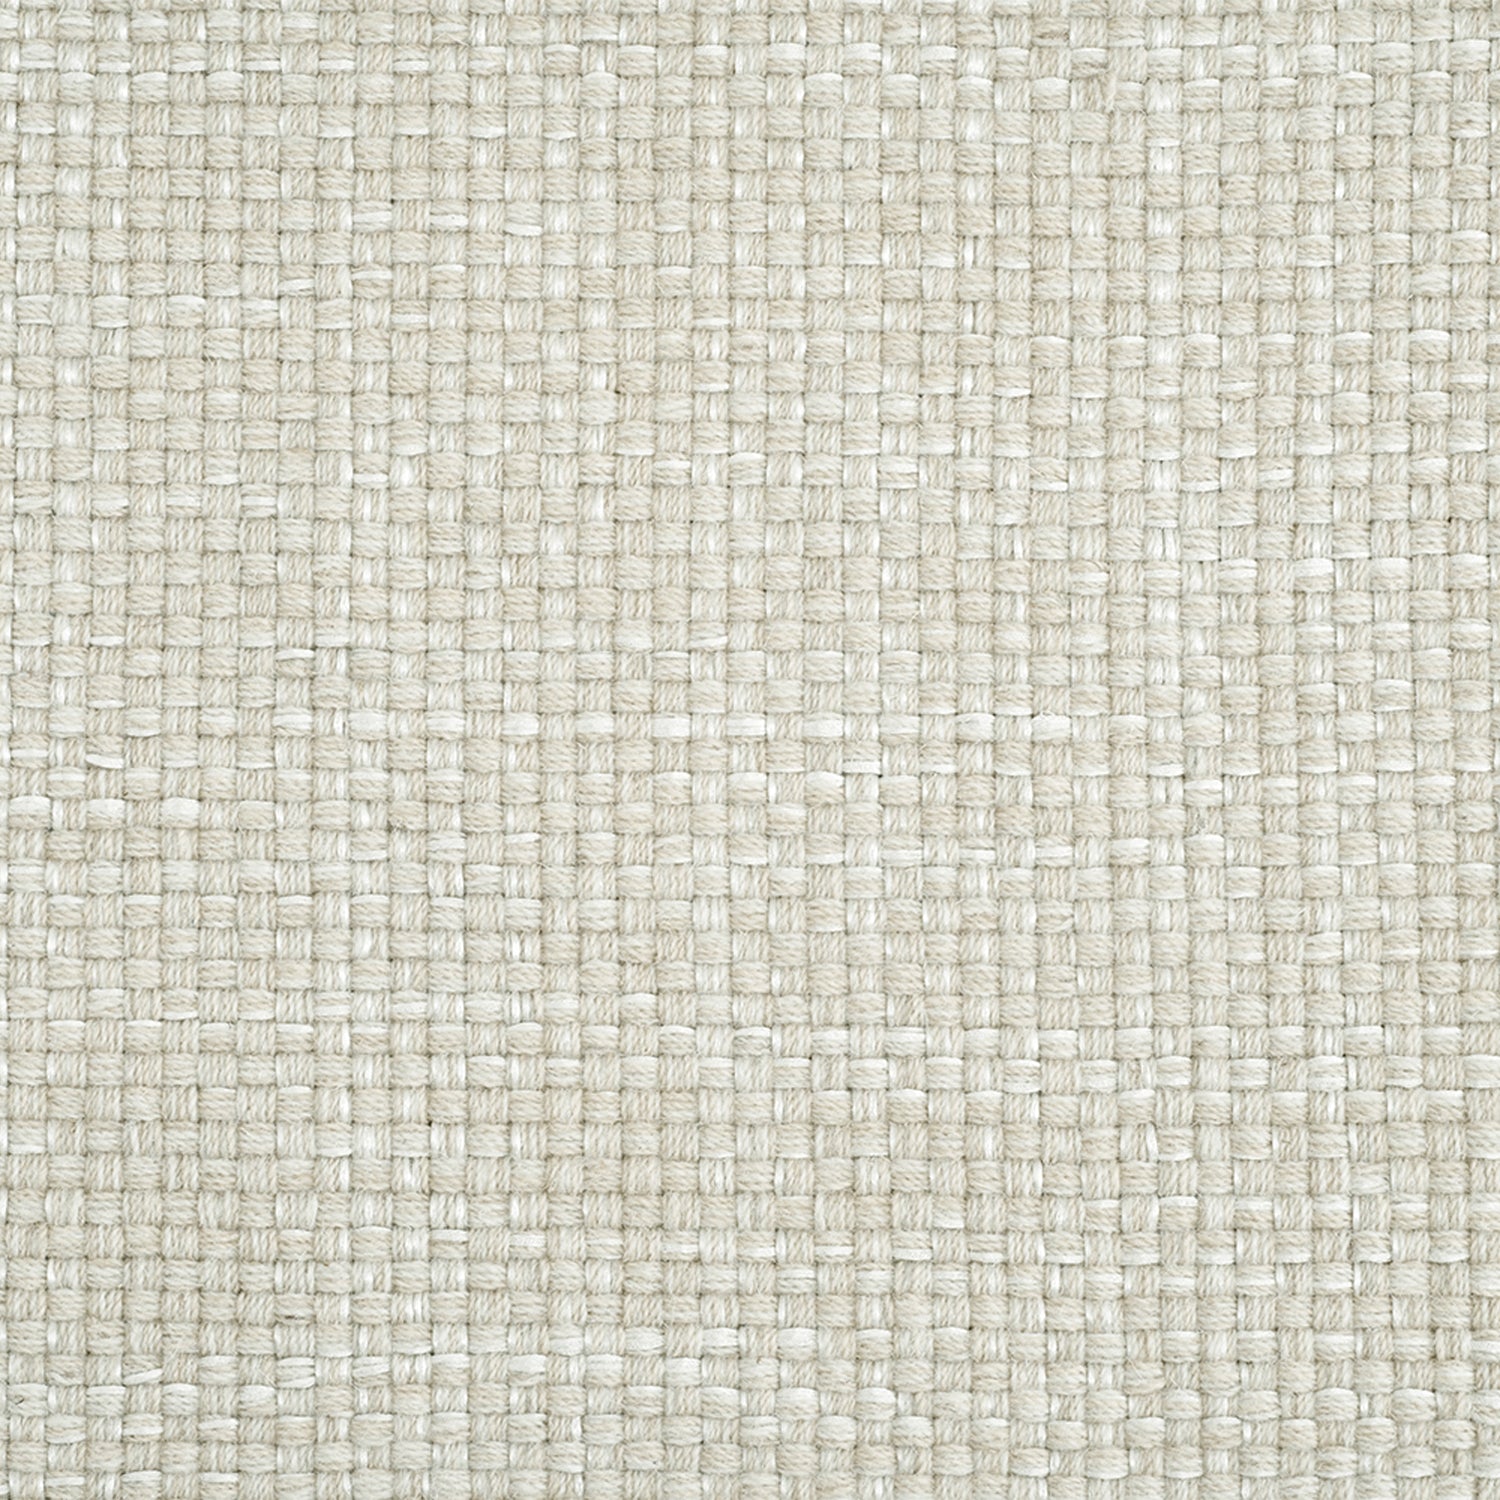 Wool-blend broadloom carpet swatch in a chunky grid weave in cream and white.